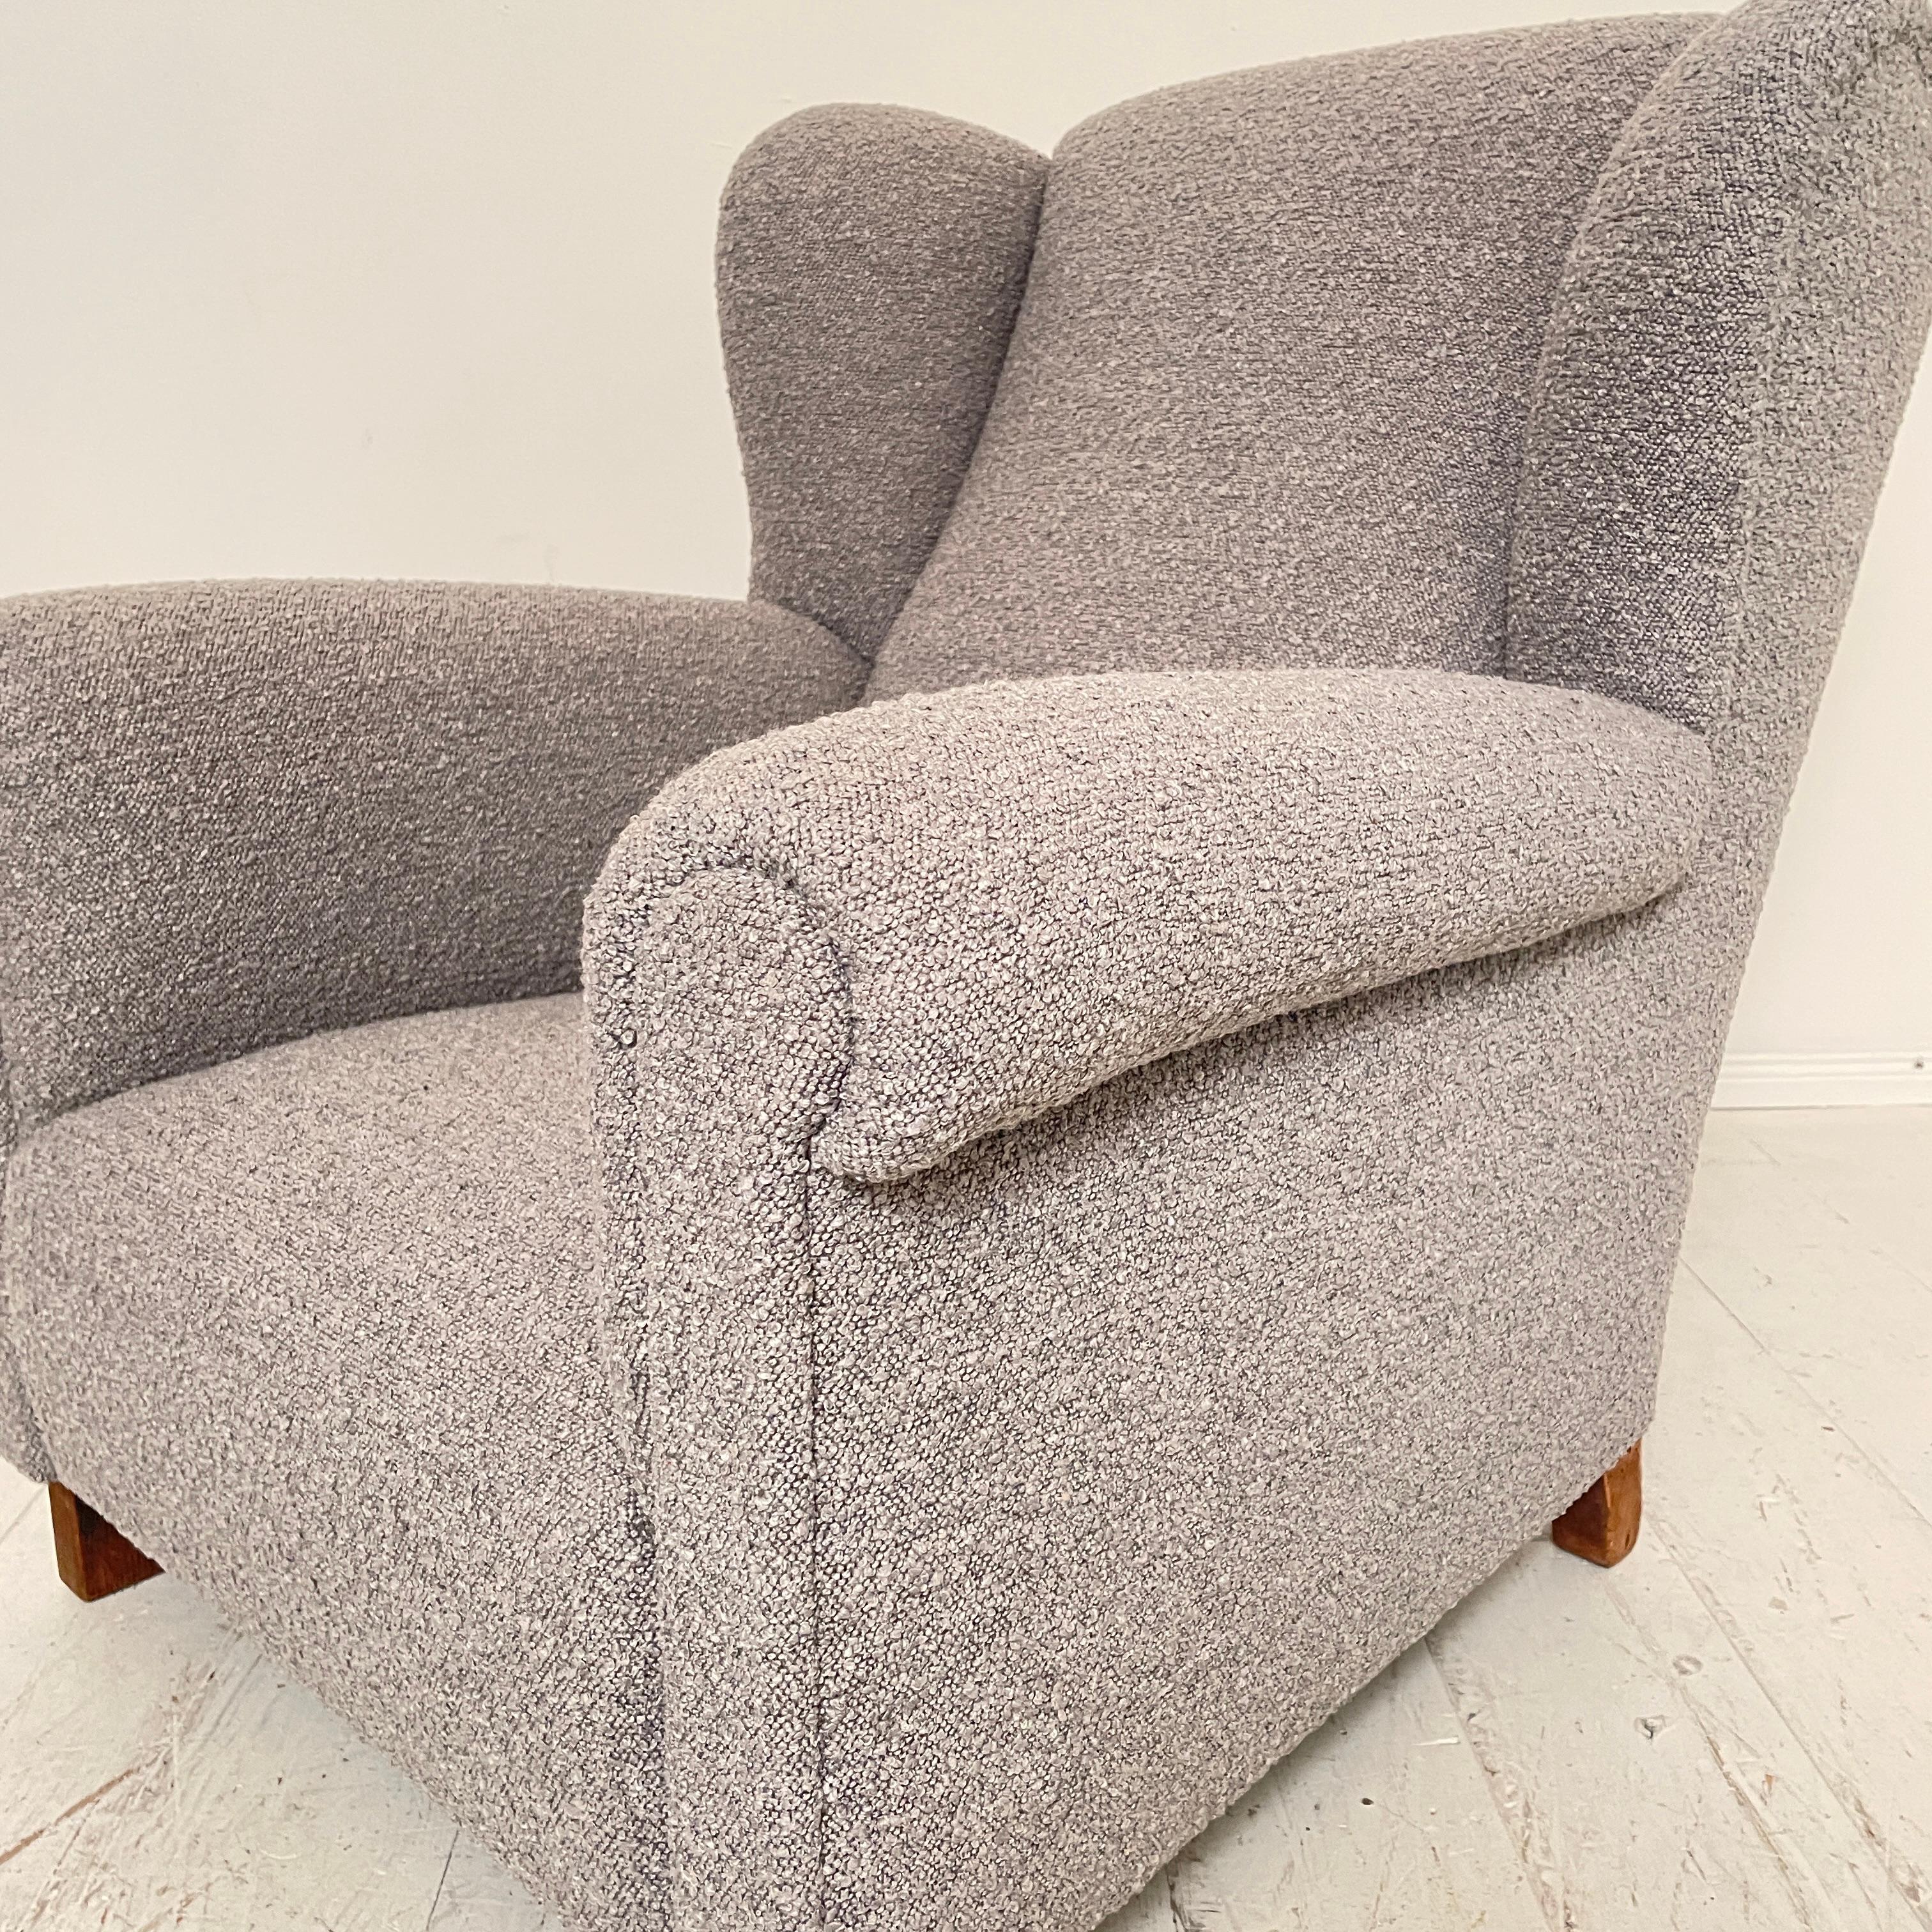 German Art Deco Wingback Chair in Gray Boucle Fabric, 1925 For Sale 7